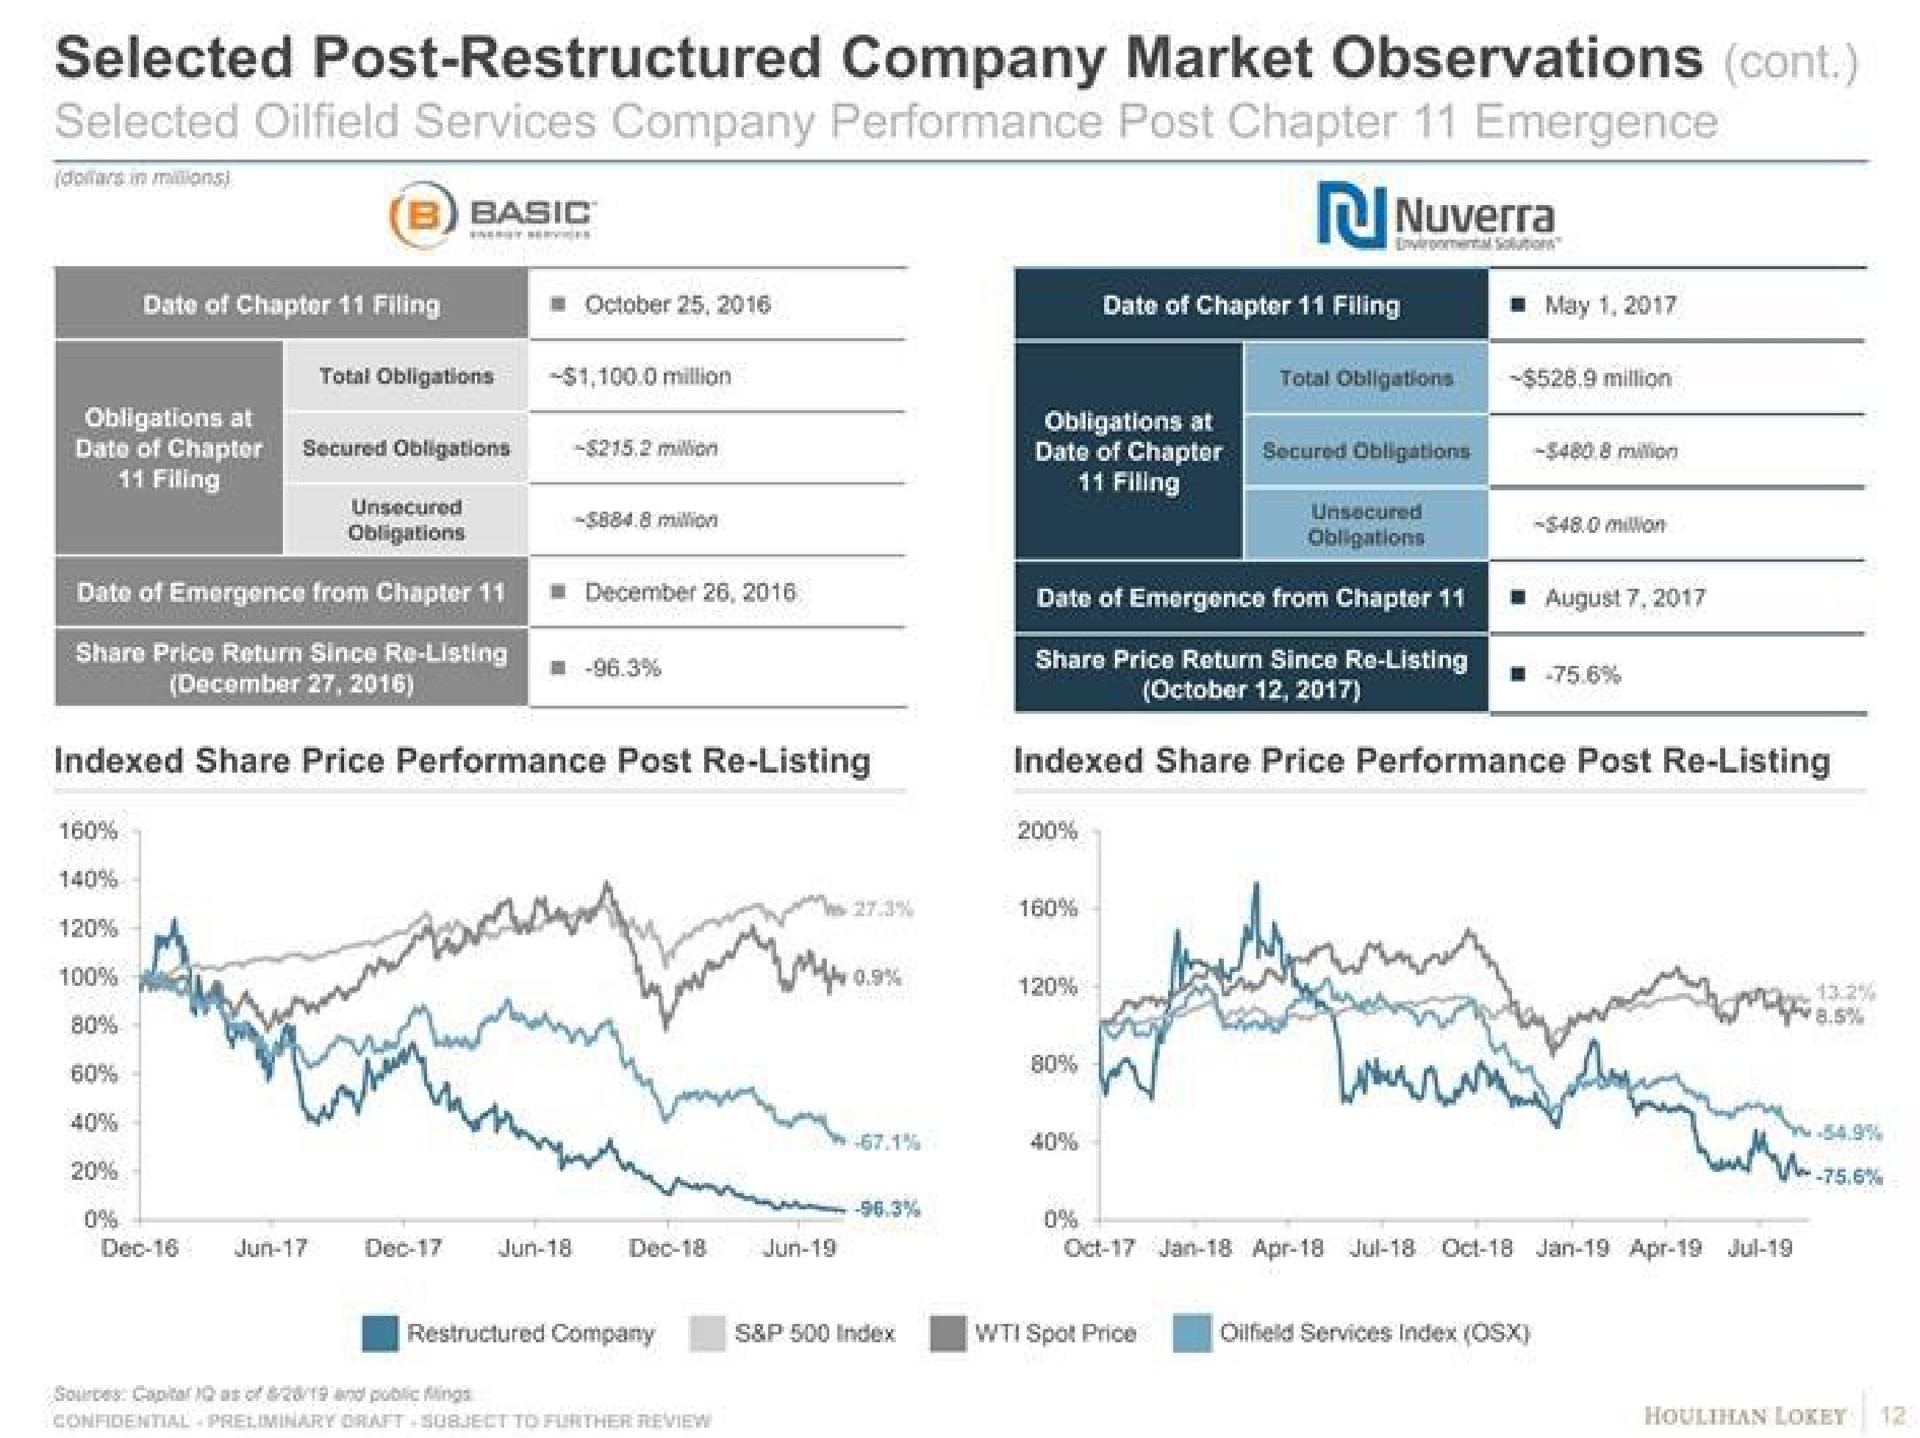 selected post company market observations services company per basic indexed share price performance post listing indexed share price performance post listing cities services index | Houlihan Lokey